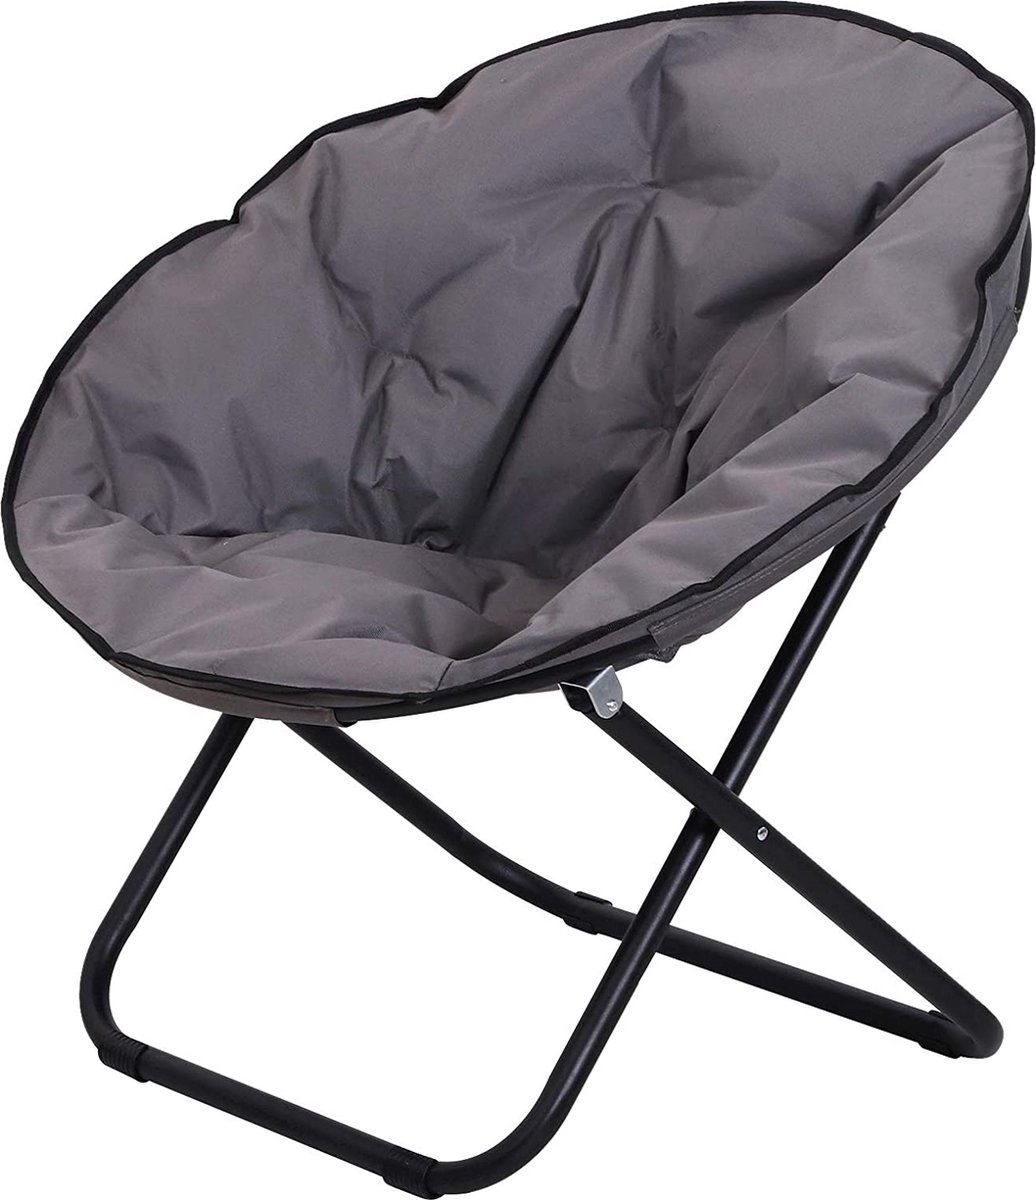 CGPN folding armchair folding chair camping chair garden chair upholstered chair lounge chair foldable metal + oxford fabric grey 80 x 80 x 75 cm